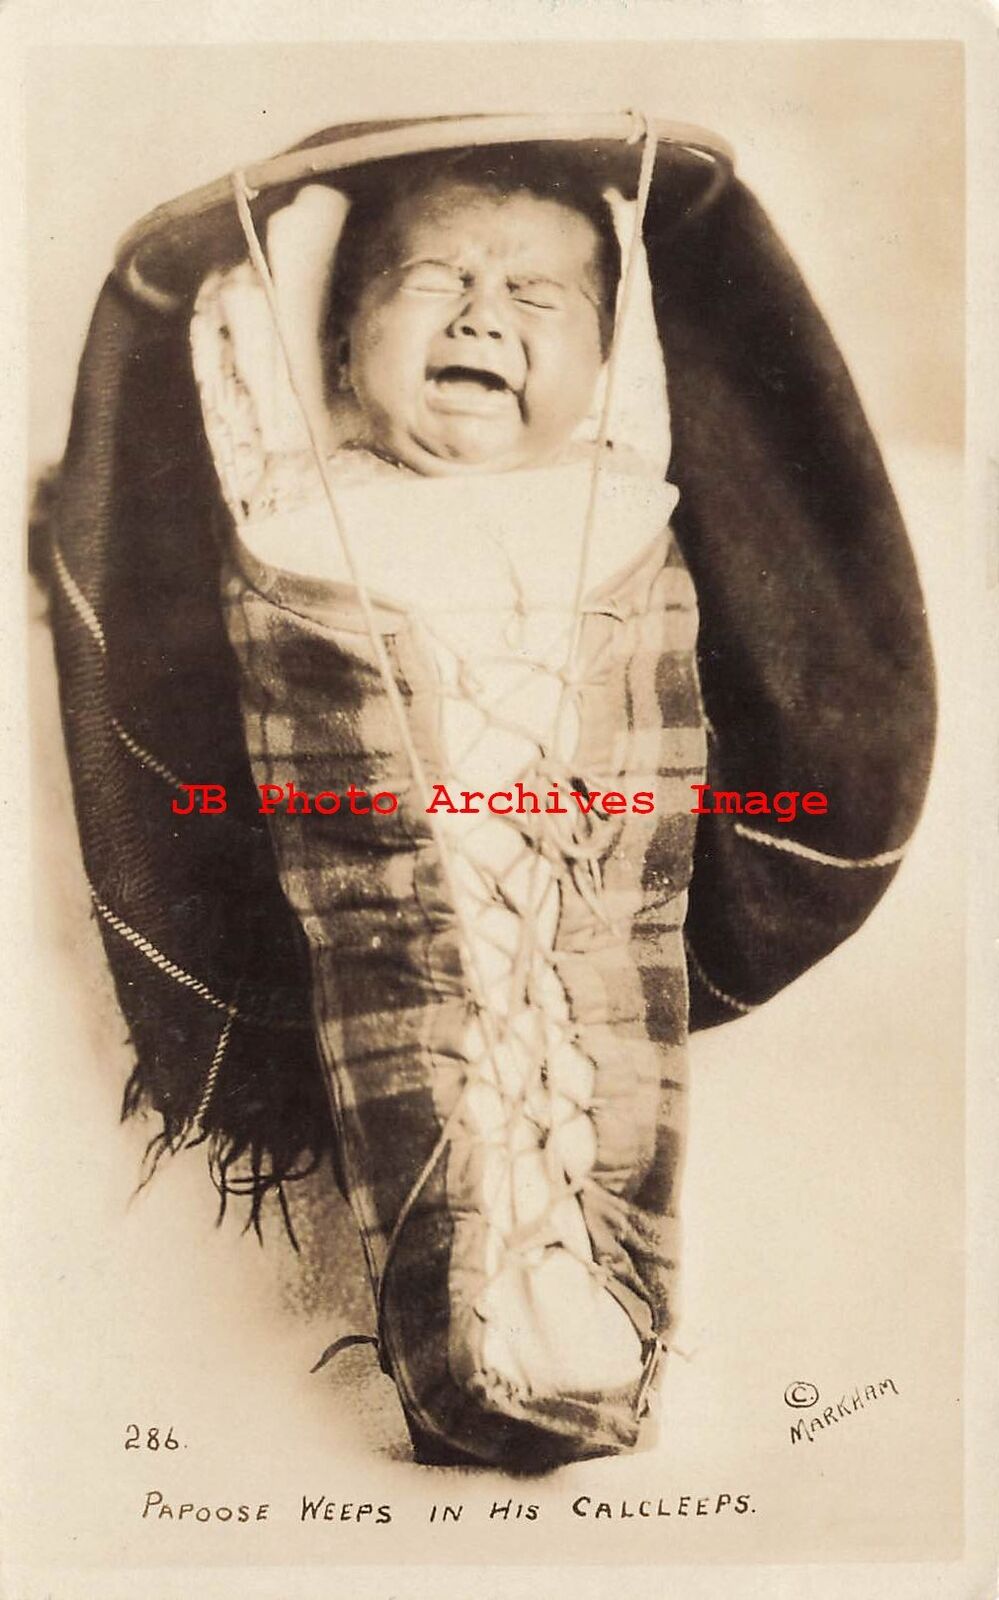 Native American Indian, RPPC, Papoose Weeps in His Calcleeps, Markham No 286